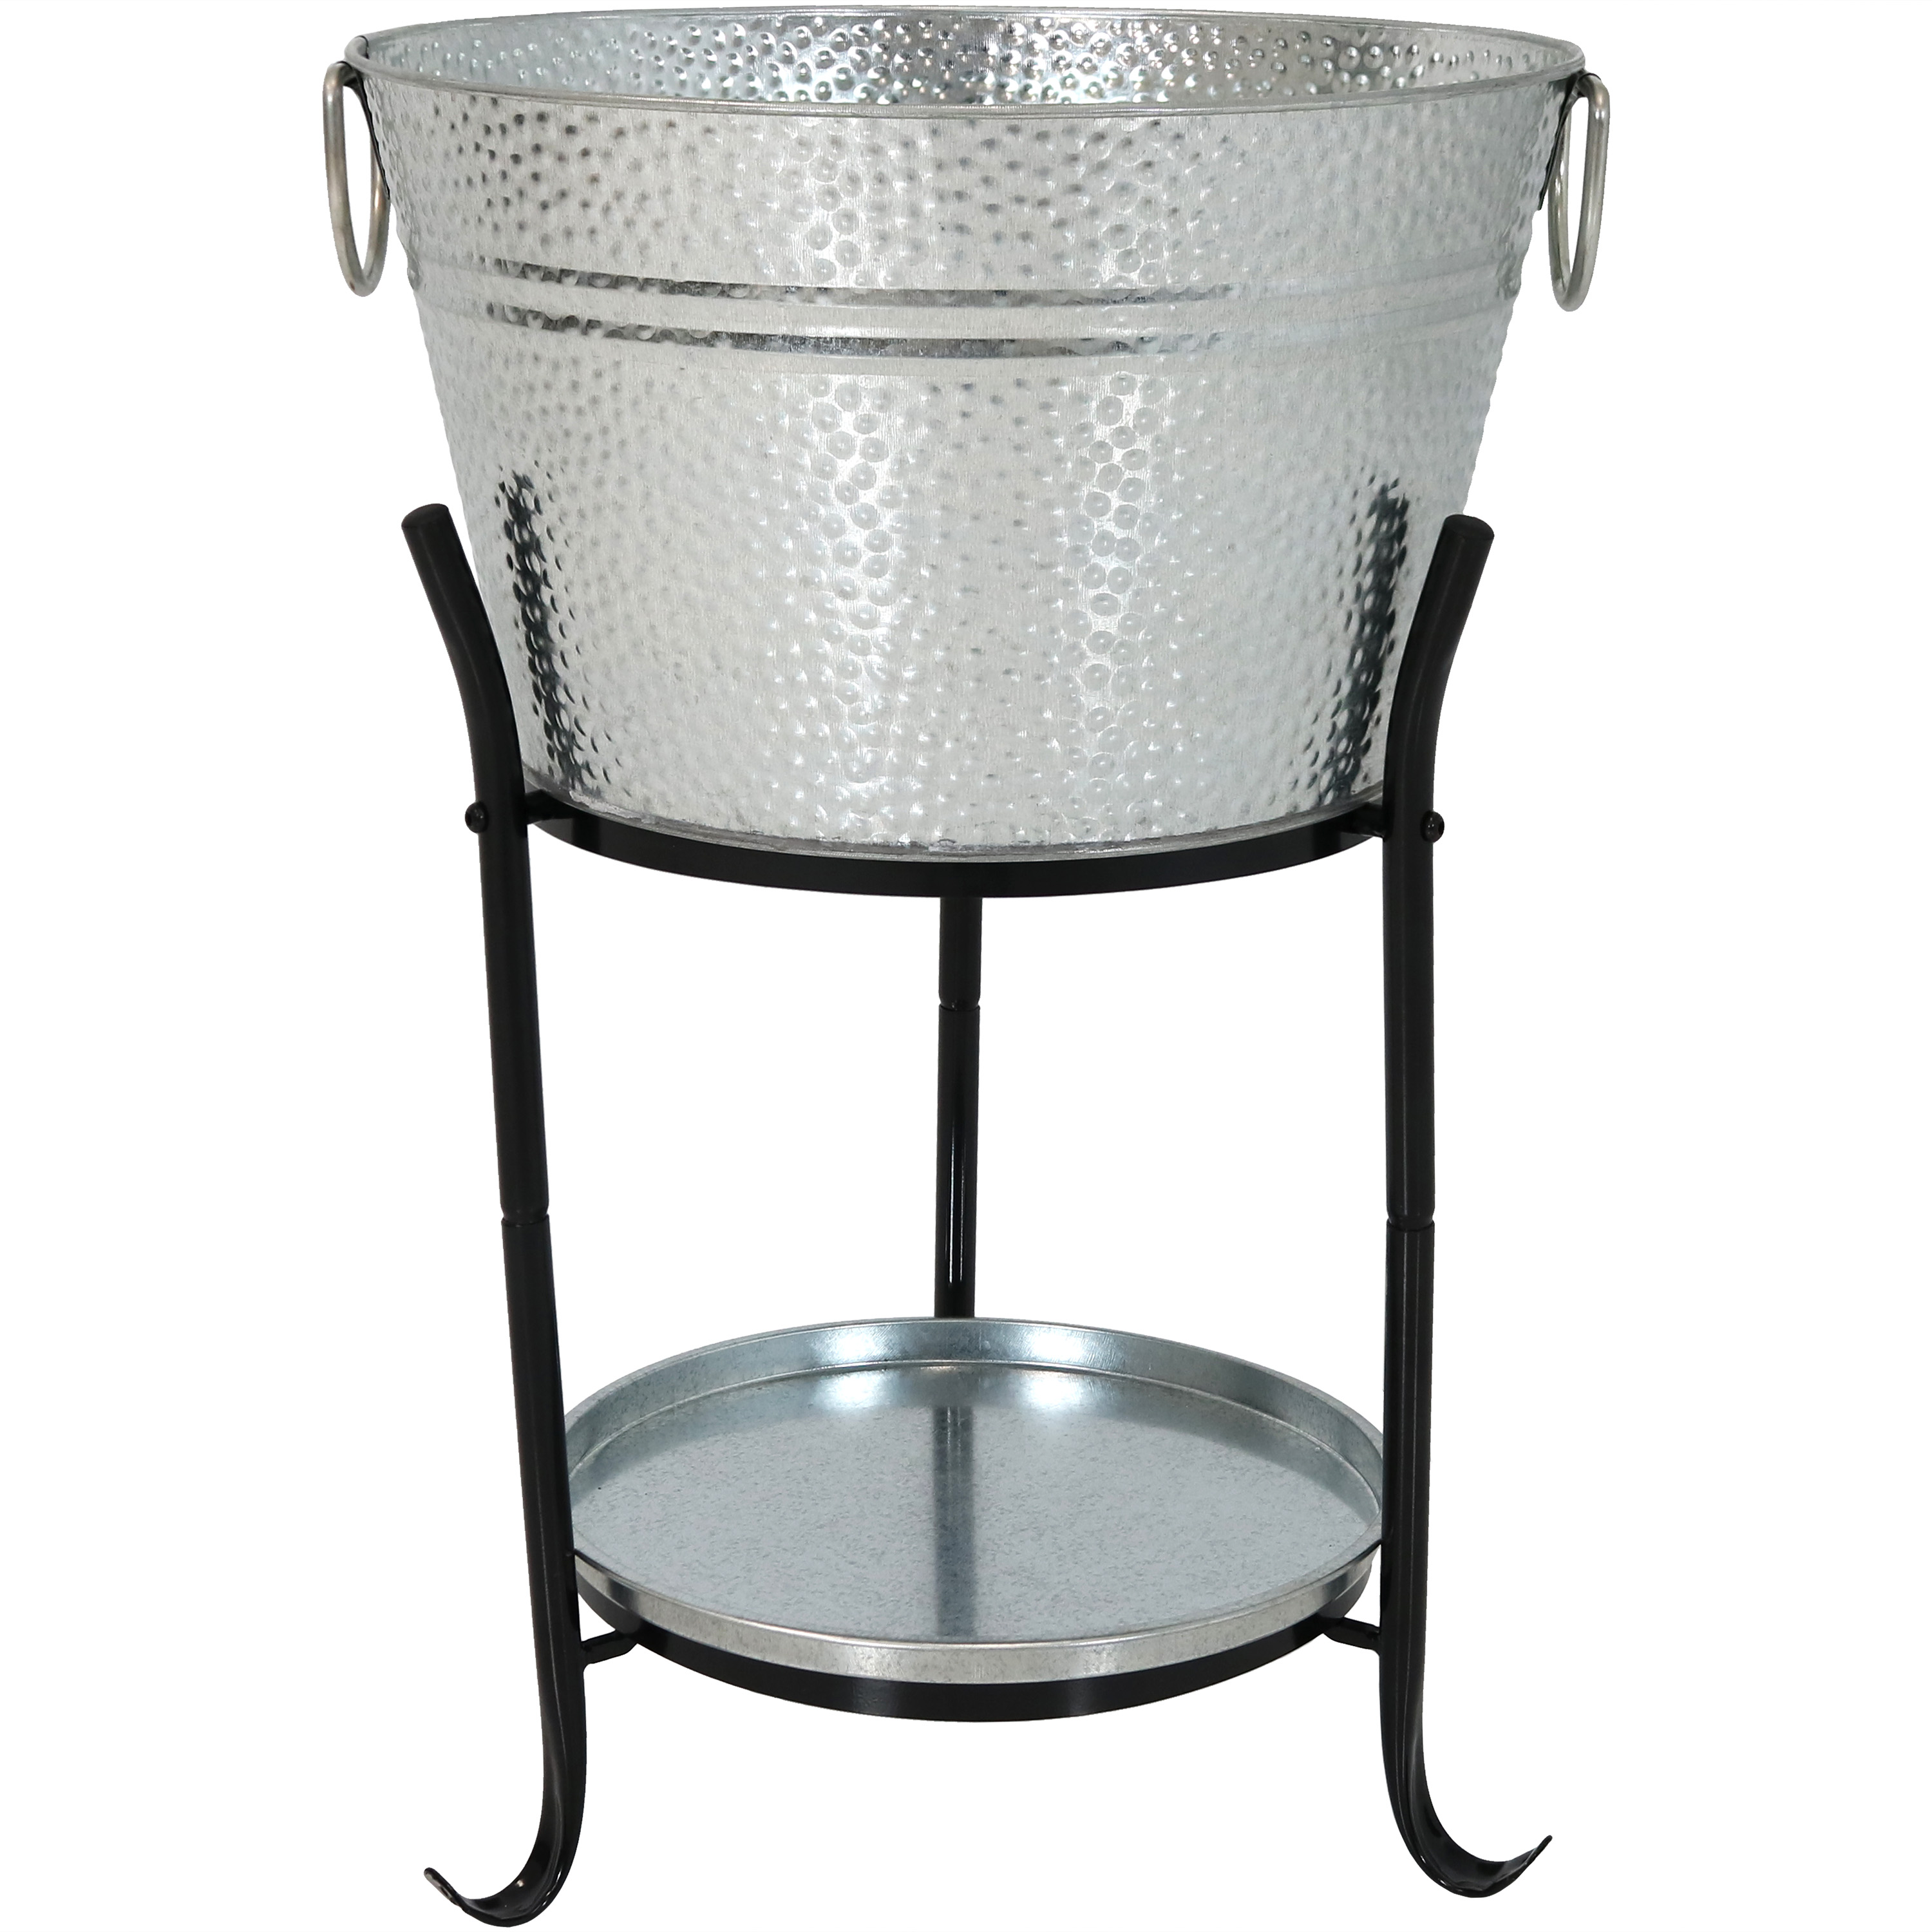 Sunnydaze Ice Bucket Drink Cooler with Stand and Tray - Pebbled Galvanized Steel